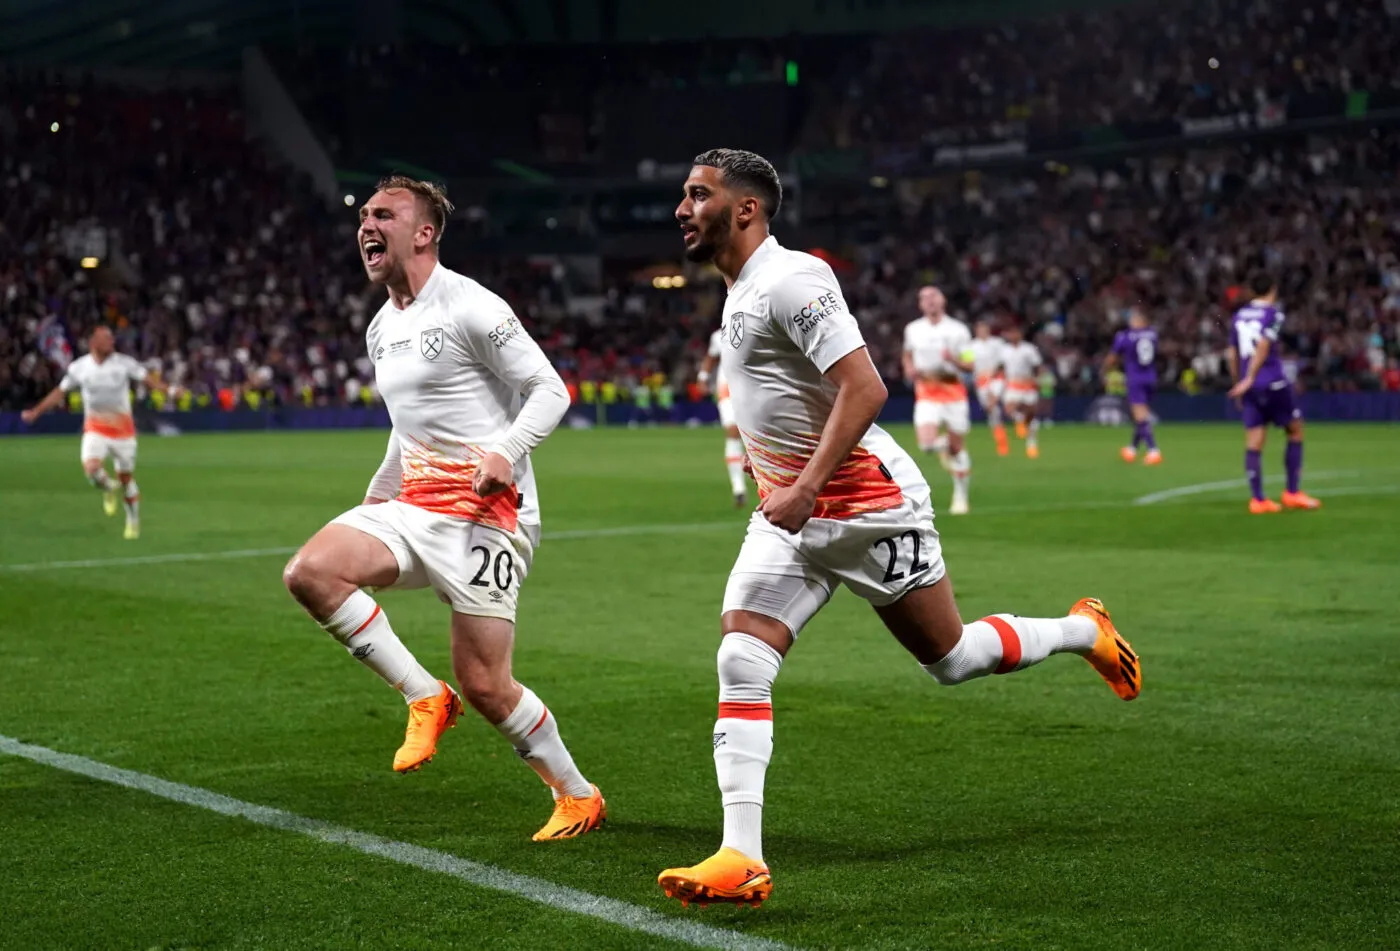 West Ham United's Said Benrahma celebrates scoring the opening goal with Jarrod Bowen during the UEFA Europa Conference League Final at the Fortuna Arena, Prague. Picture date: Wednesday June 7, 2023. - Photo by Icon sport